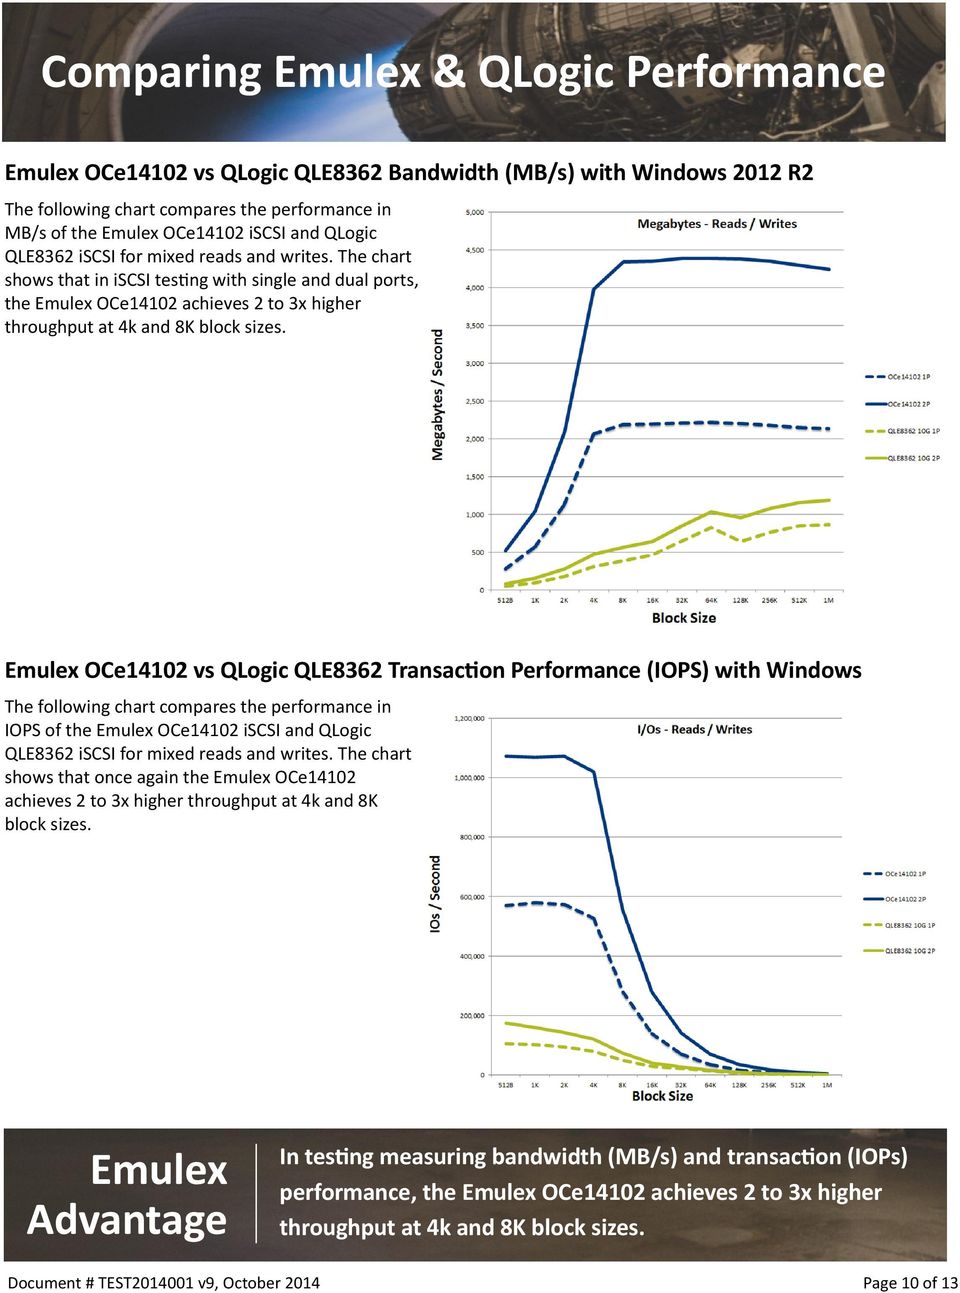 Emulex OCe14102 vs QLogic QLE8362 Transaction Performance (IOPS) with Windows The following chart compares the performance in IOPS of the Emulex OCe14102 iscsi and QLogic QLE8362 iscsi for mixed